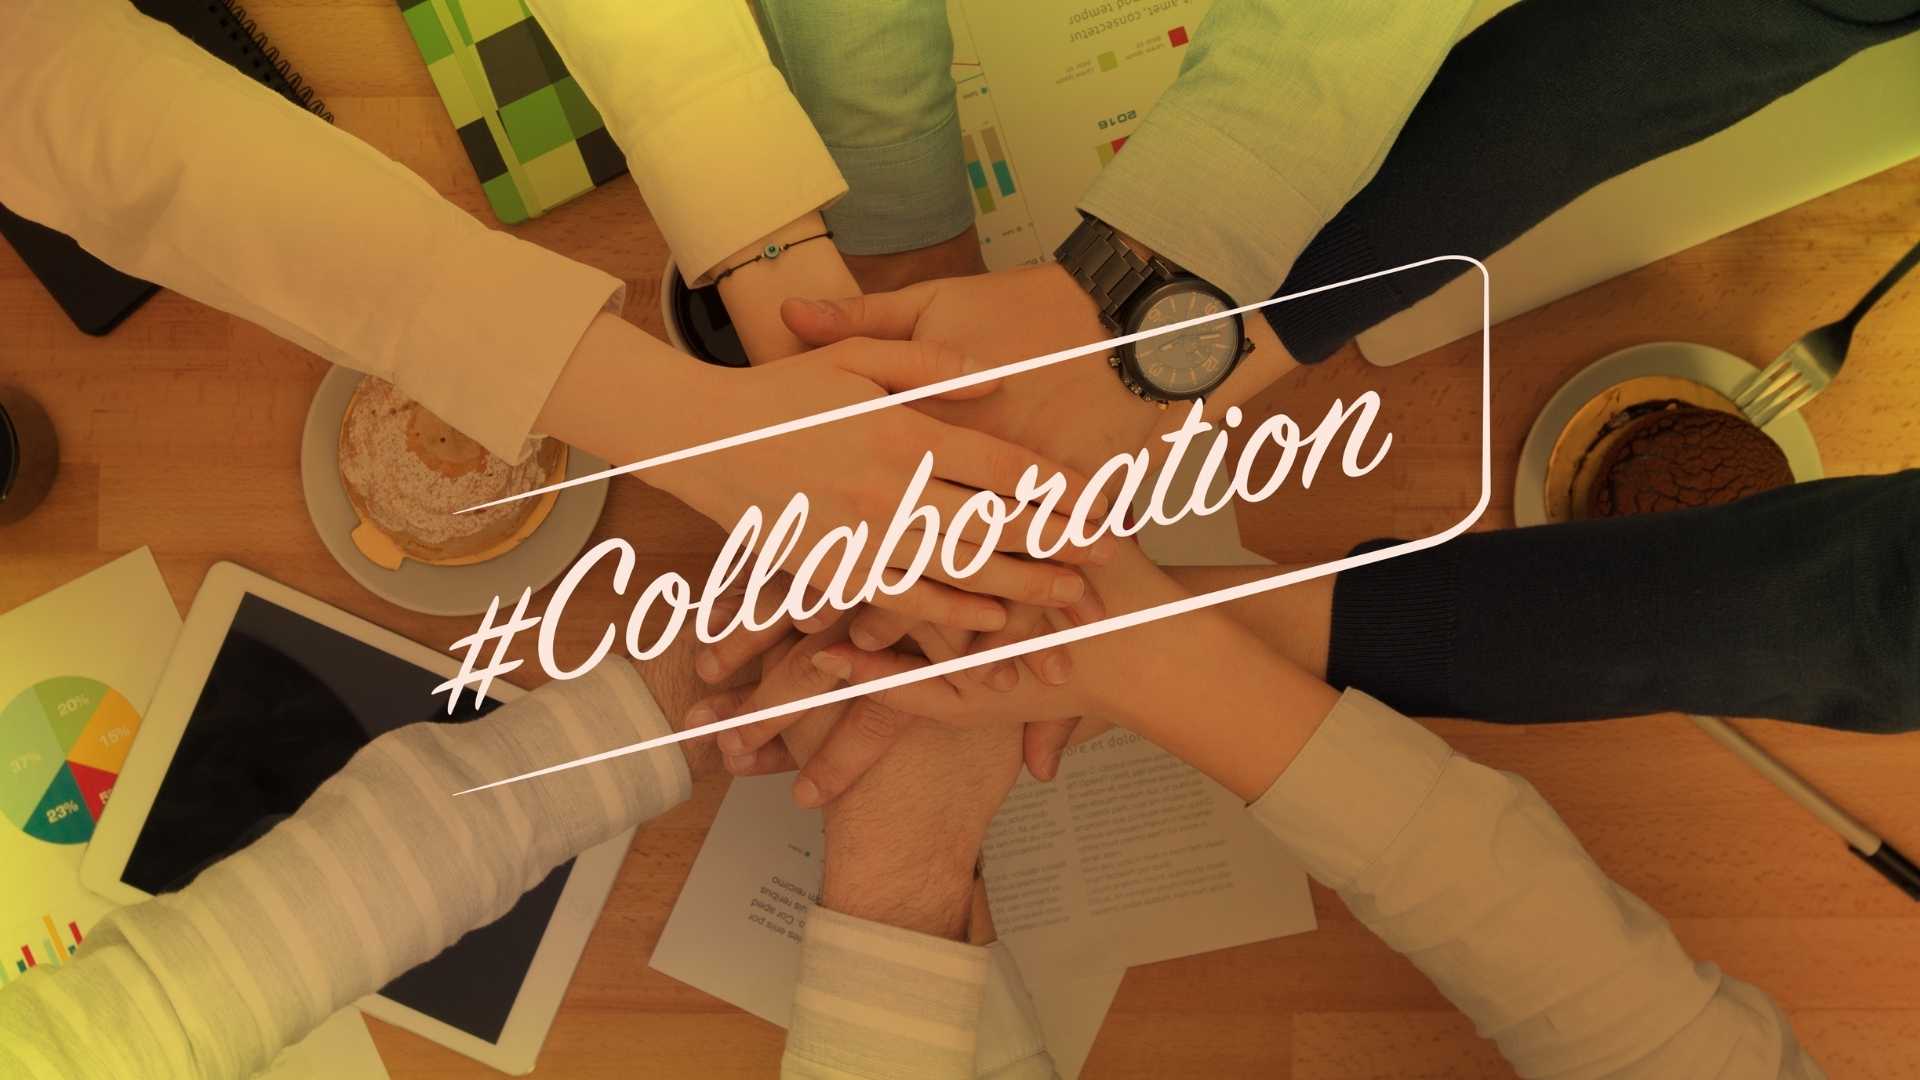 To collaborate or not to collaborate?